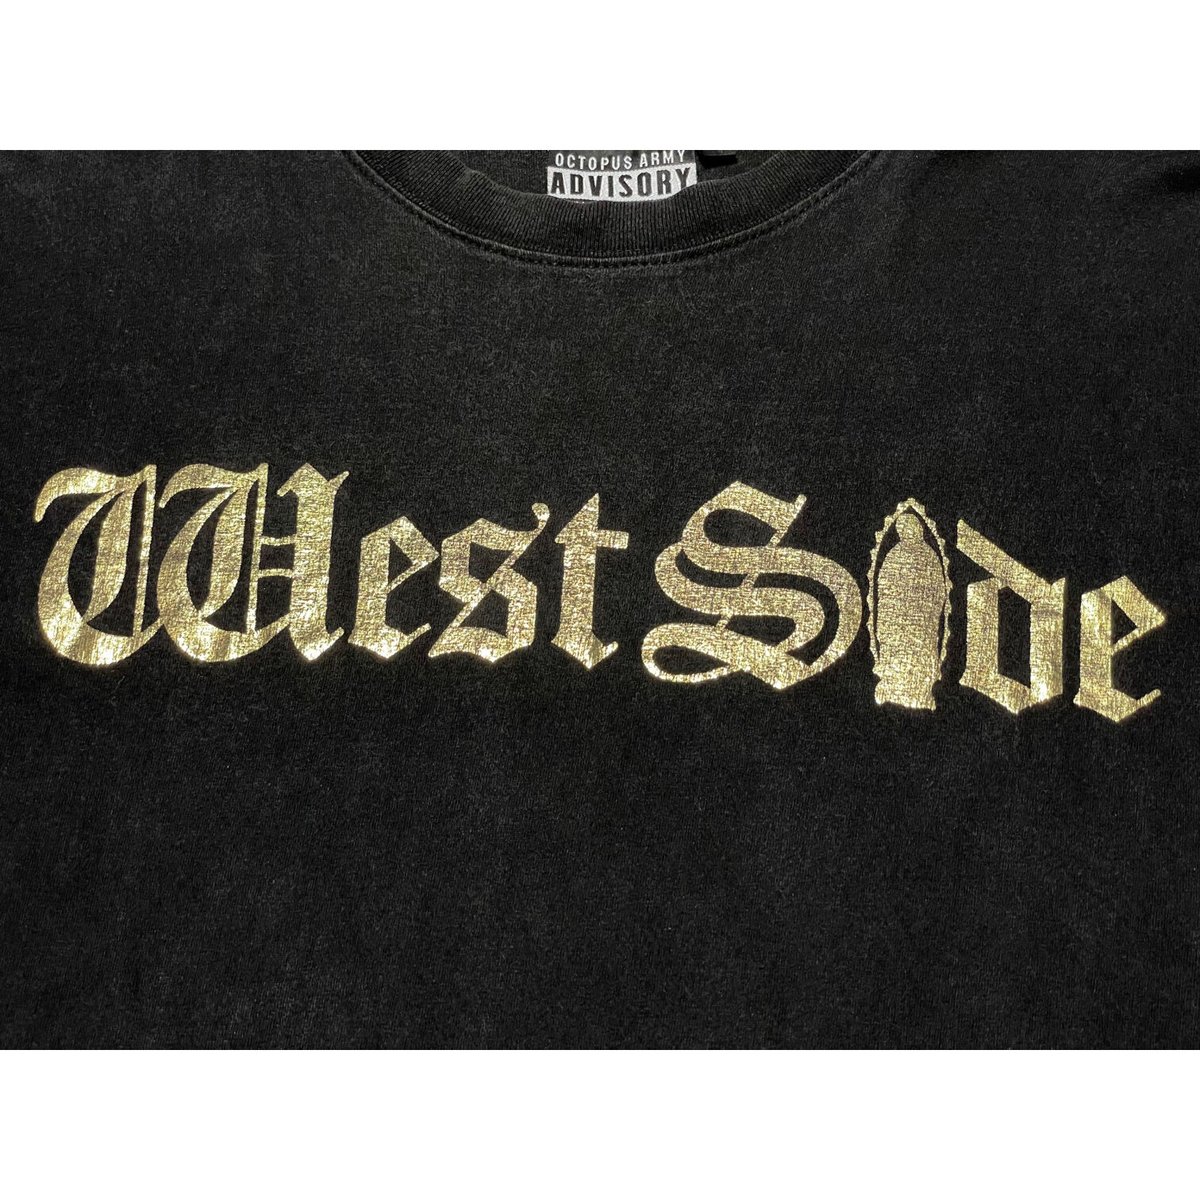 OCTOPUS ARMY ADVISORY WEST SIDE × EAST SIDE Tシャ...